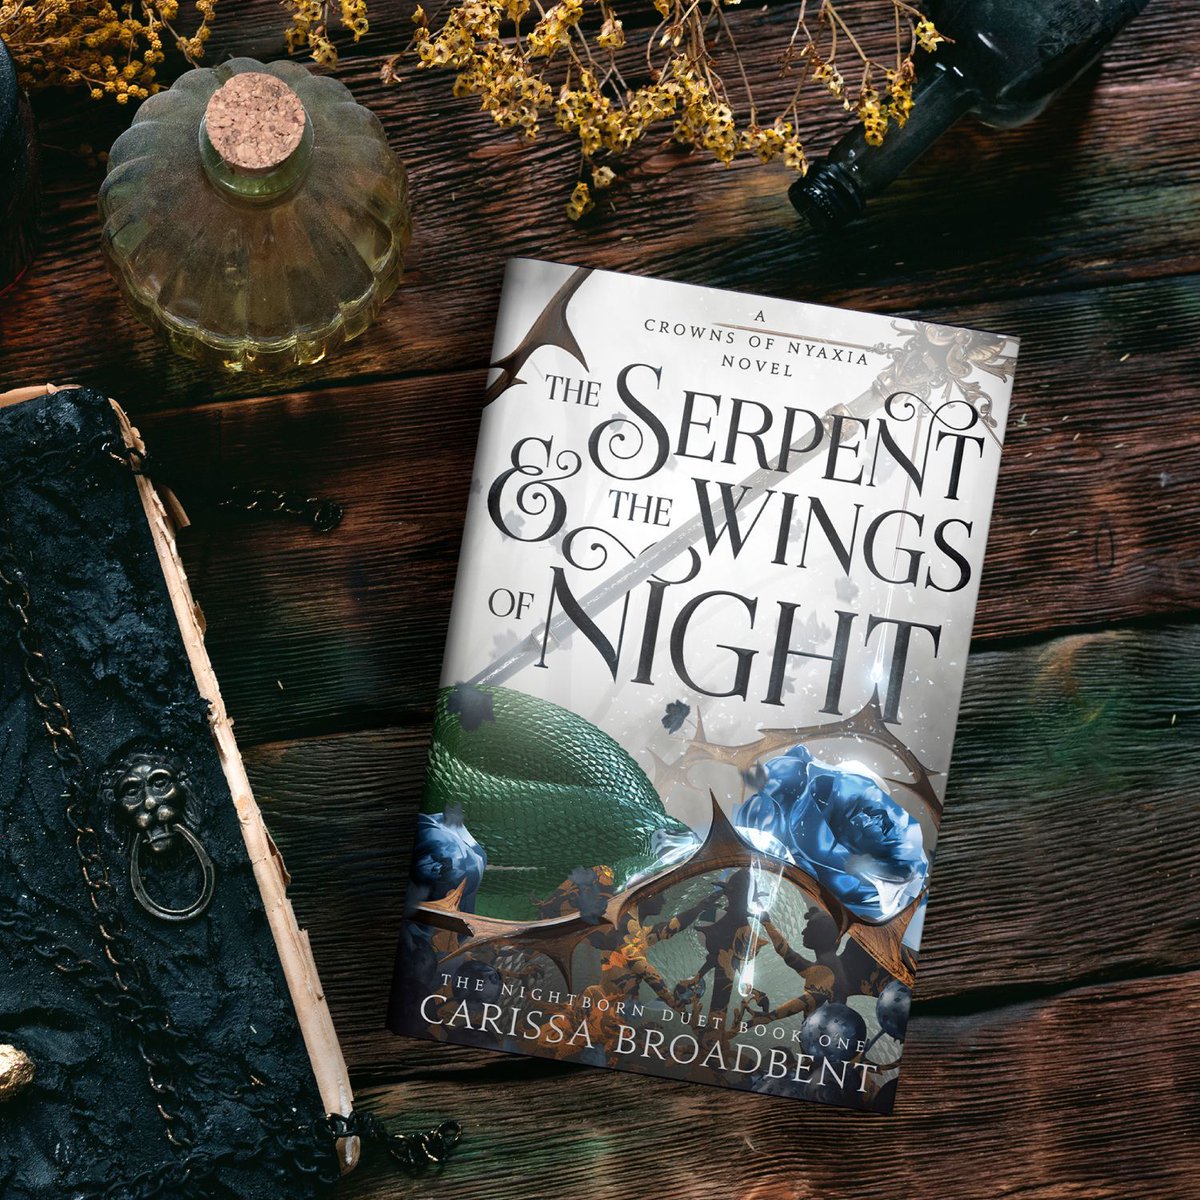 The Hunger Games meets vampires in this heart-wrenching, epic fantasy romance of dark magic and bloodthirsty intrigue 🧛 The Serpent & the Wings of Night by @CarissaNasyra is out in hardback now: buff.ly/48oKPag